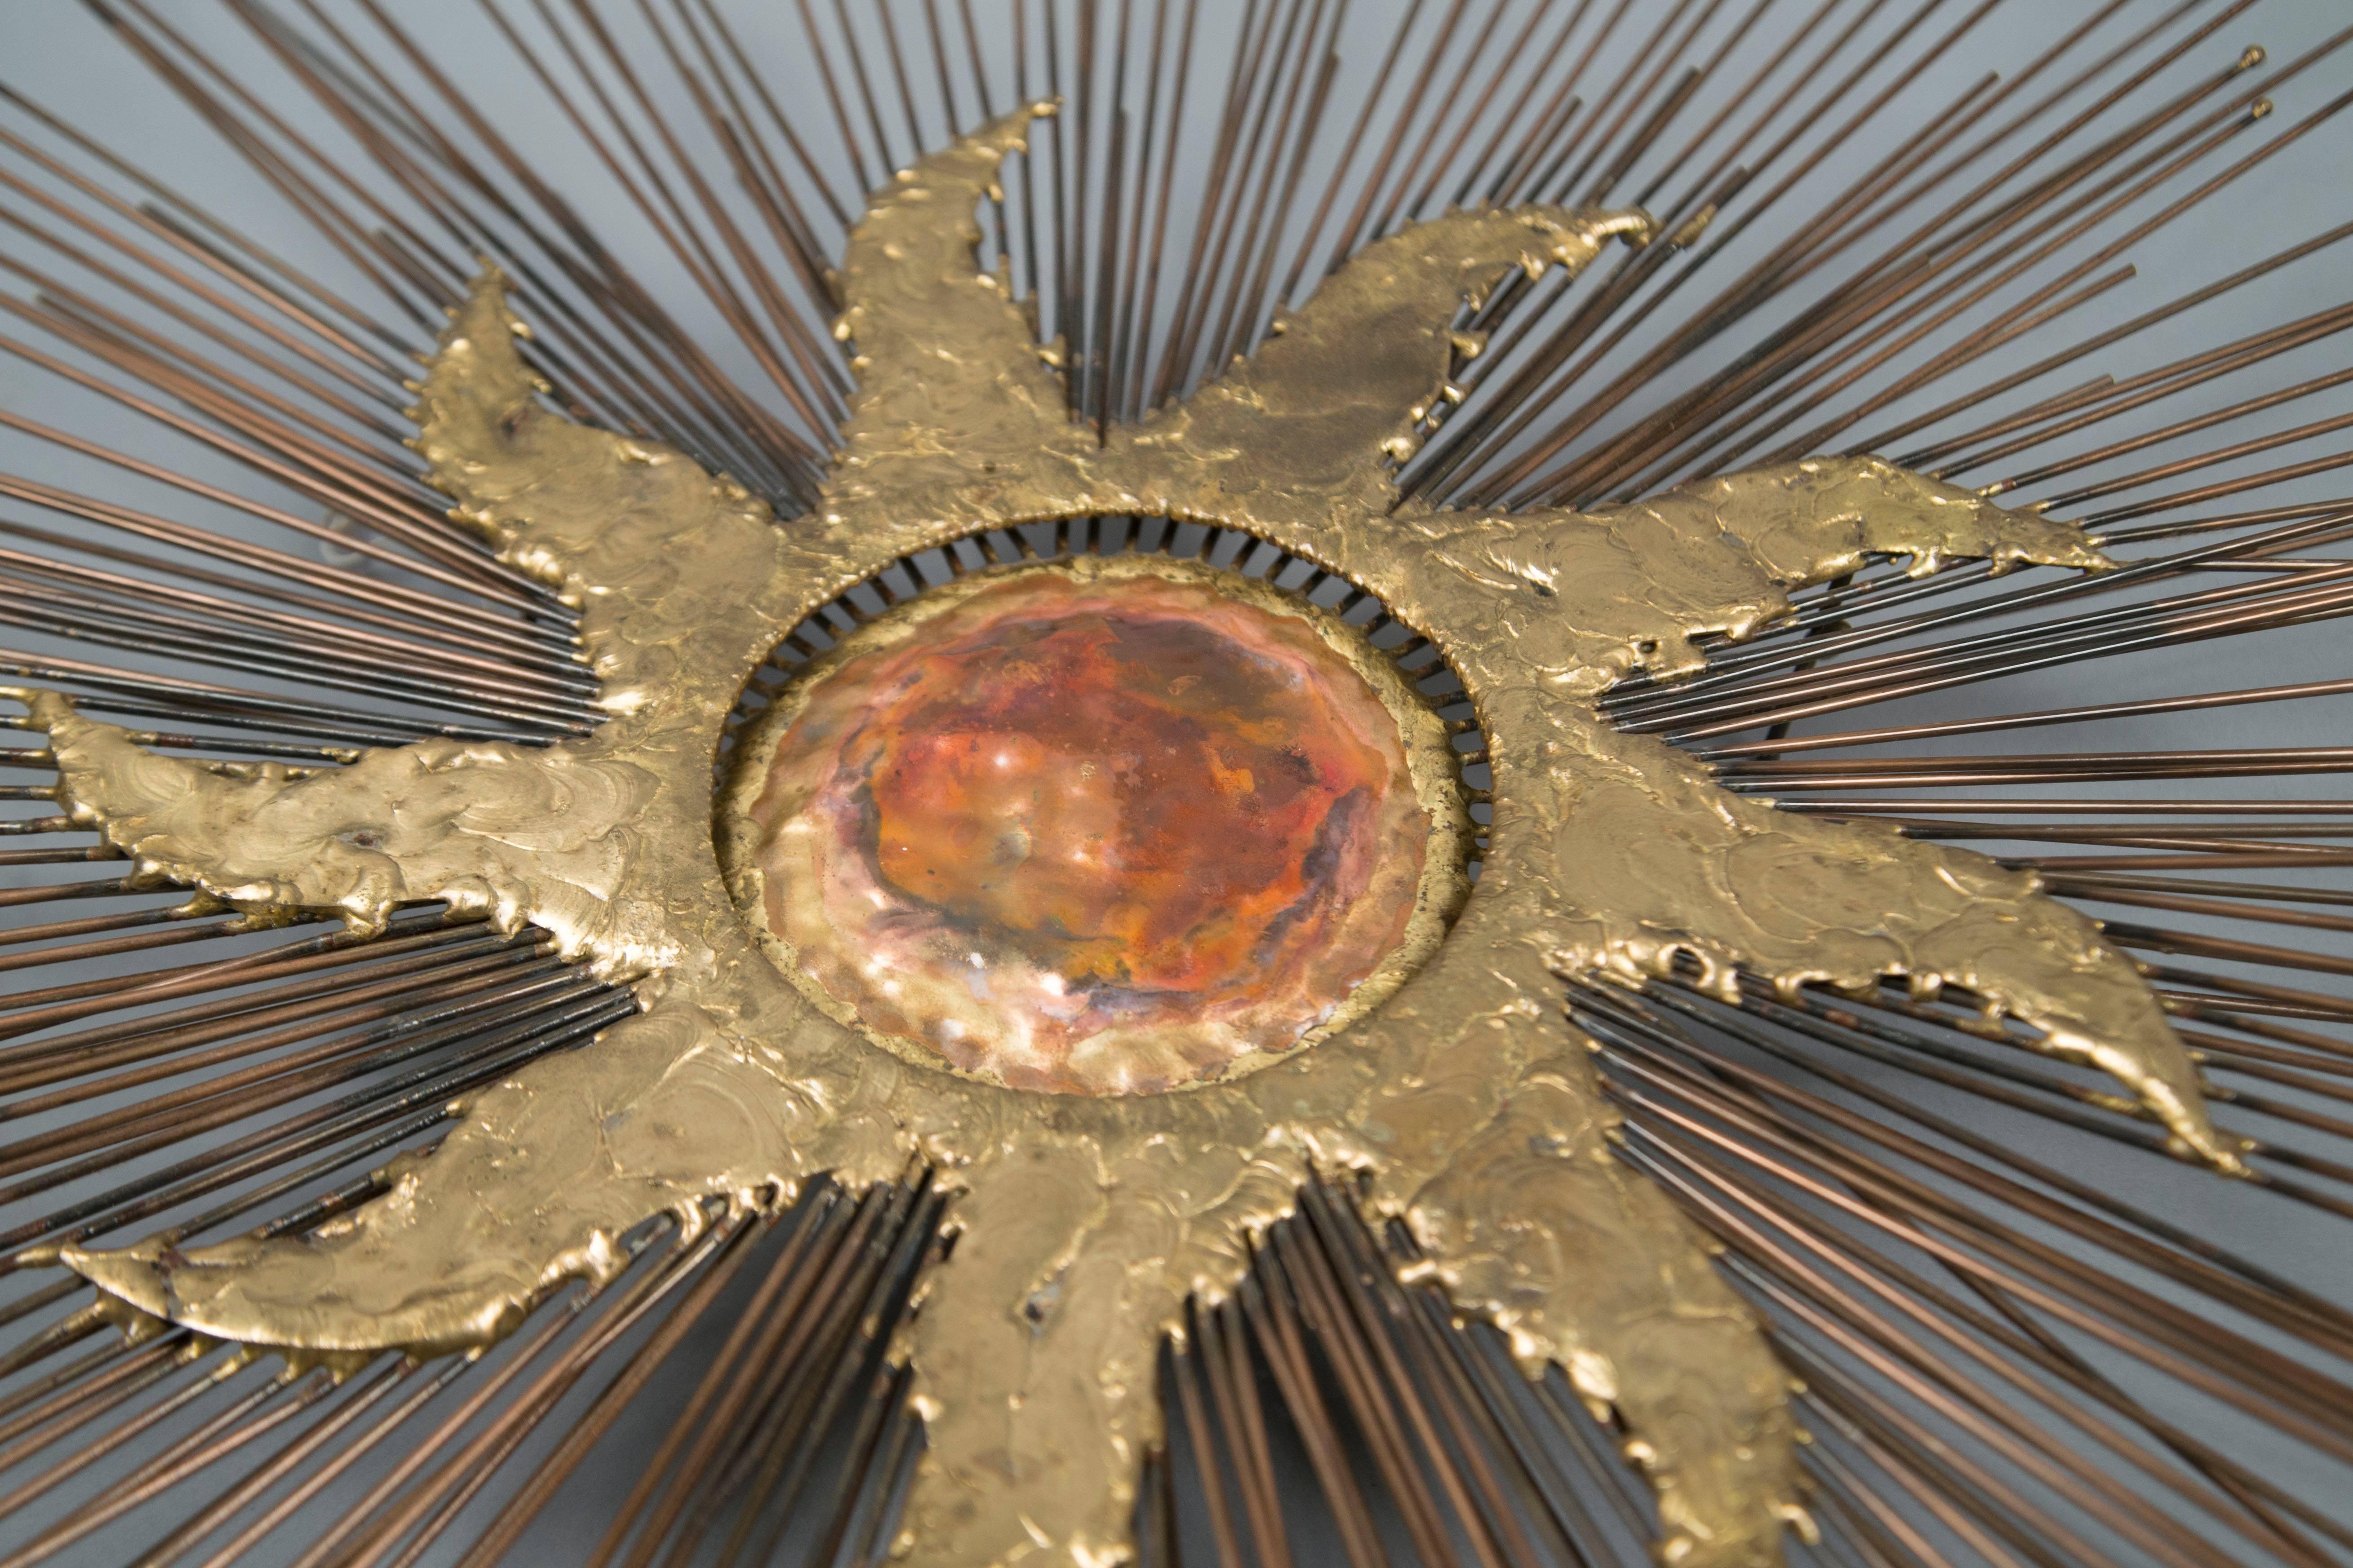 Brass wall sculpture featuring a stylized sun with an oxidized reddish center on top of radiating brass rods of varying lengths.
  
  